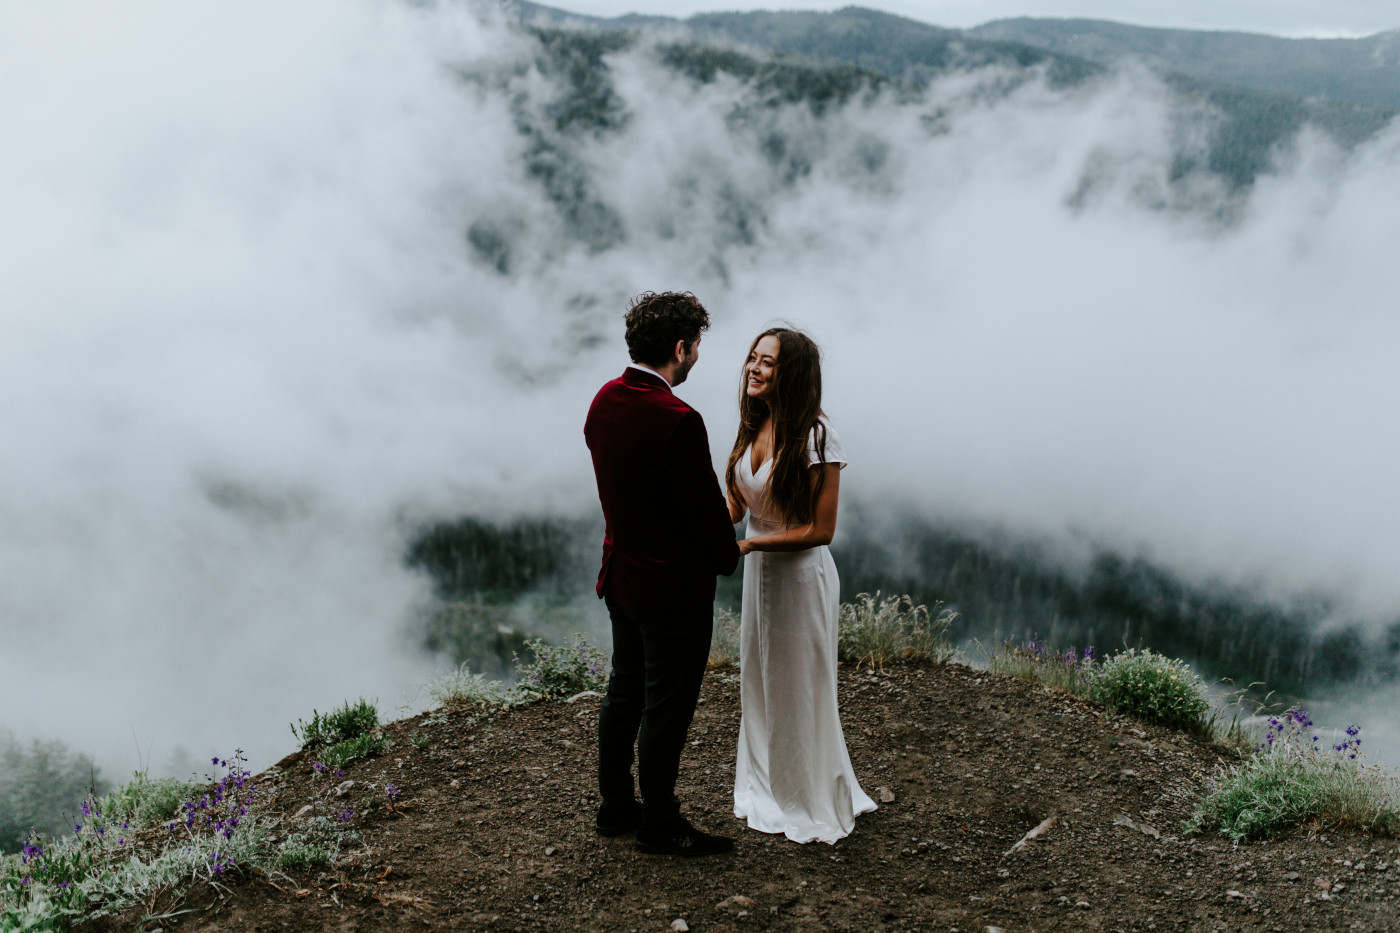 Murray and Katelyn along a cliff. Elopement wedding photography at Mount Hood by Sienna Plus Josh.